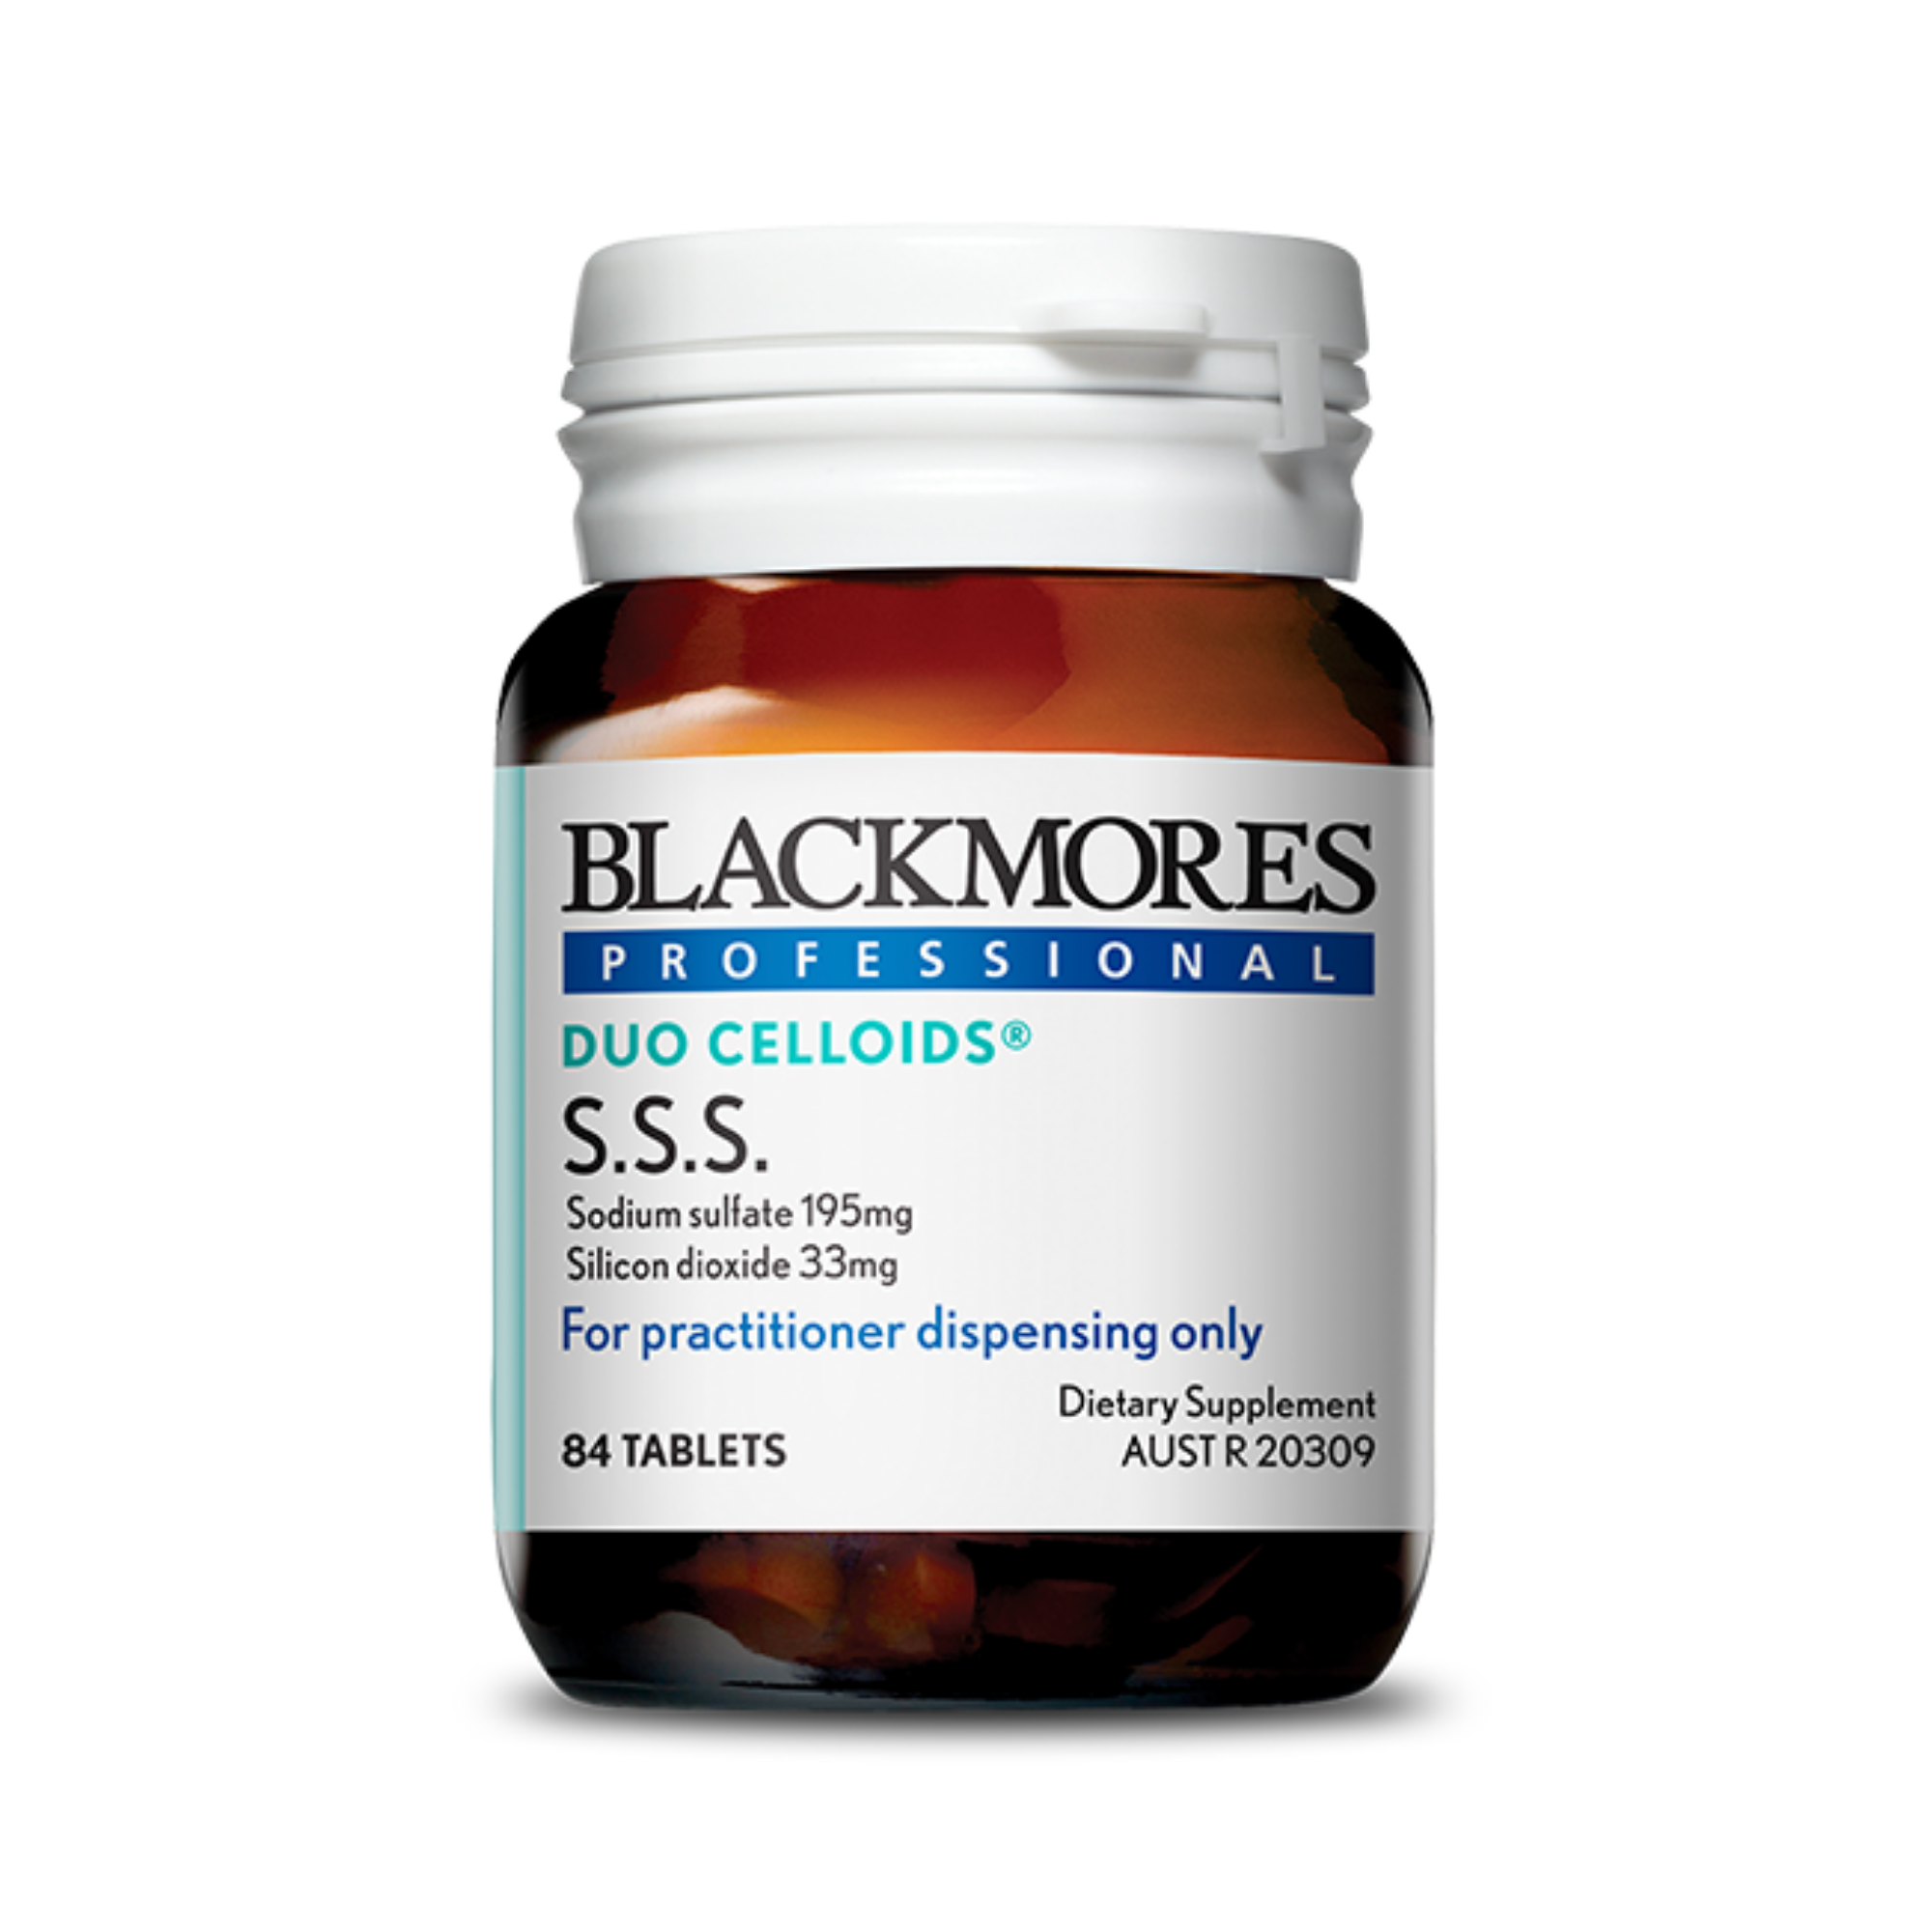 Blackmore Professional S.S.S Duo Celloids 84 Tablets 